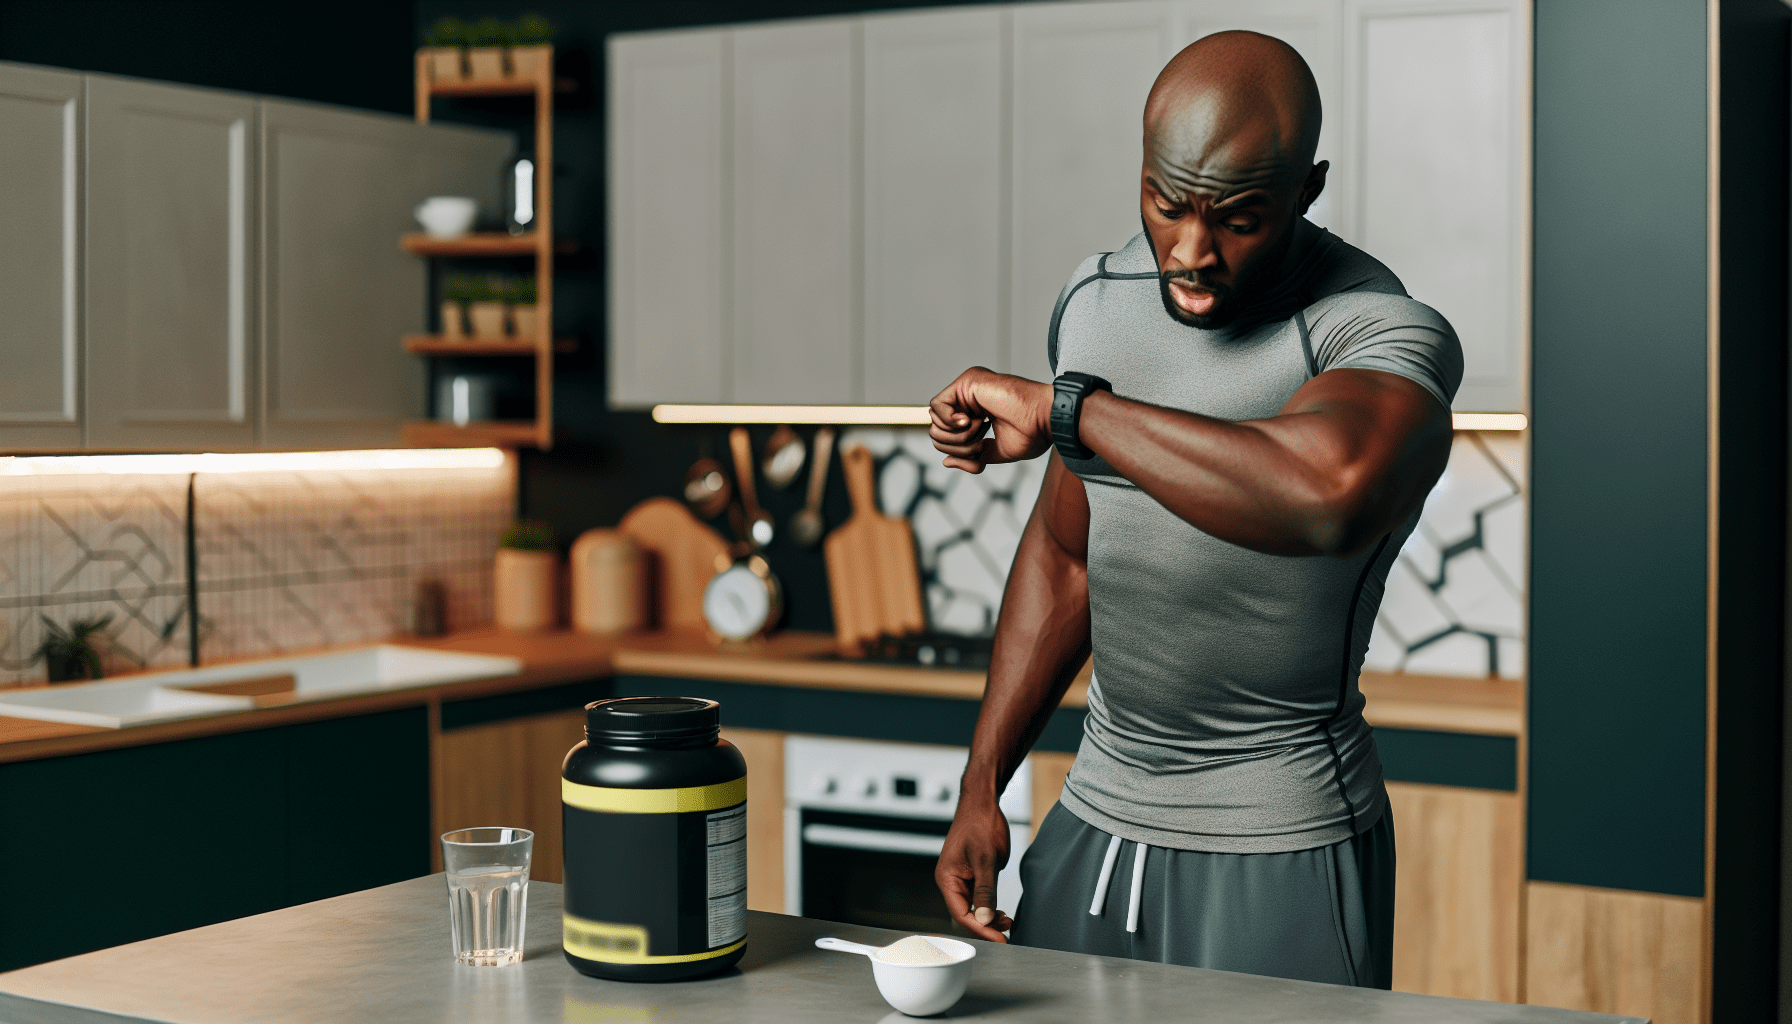 Person timing pre-workout intake before exercise